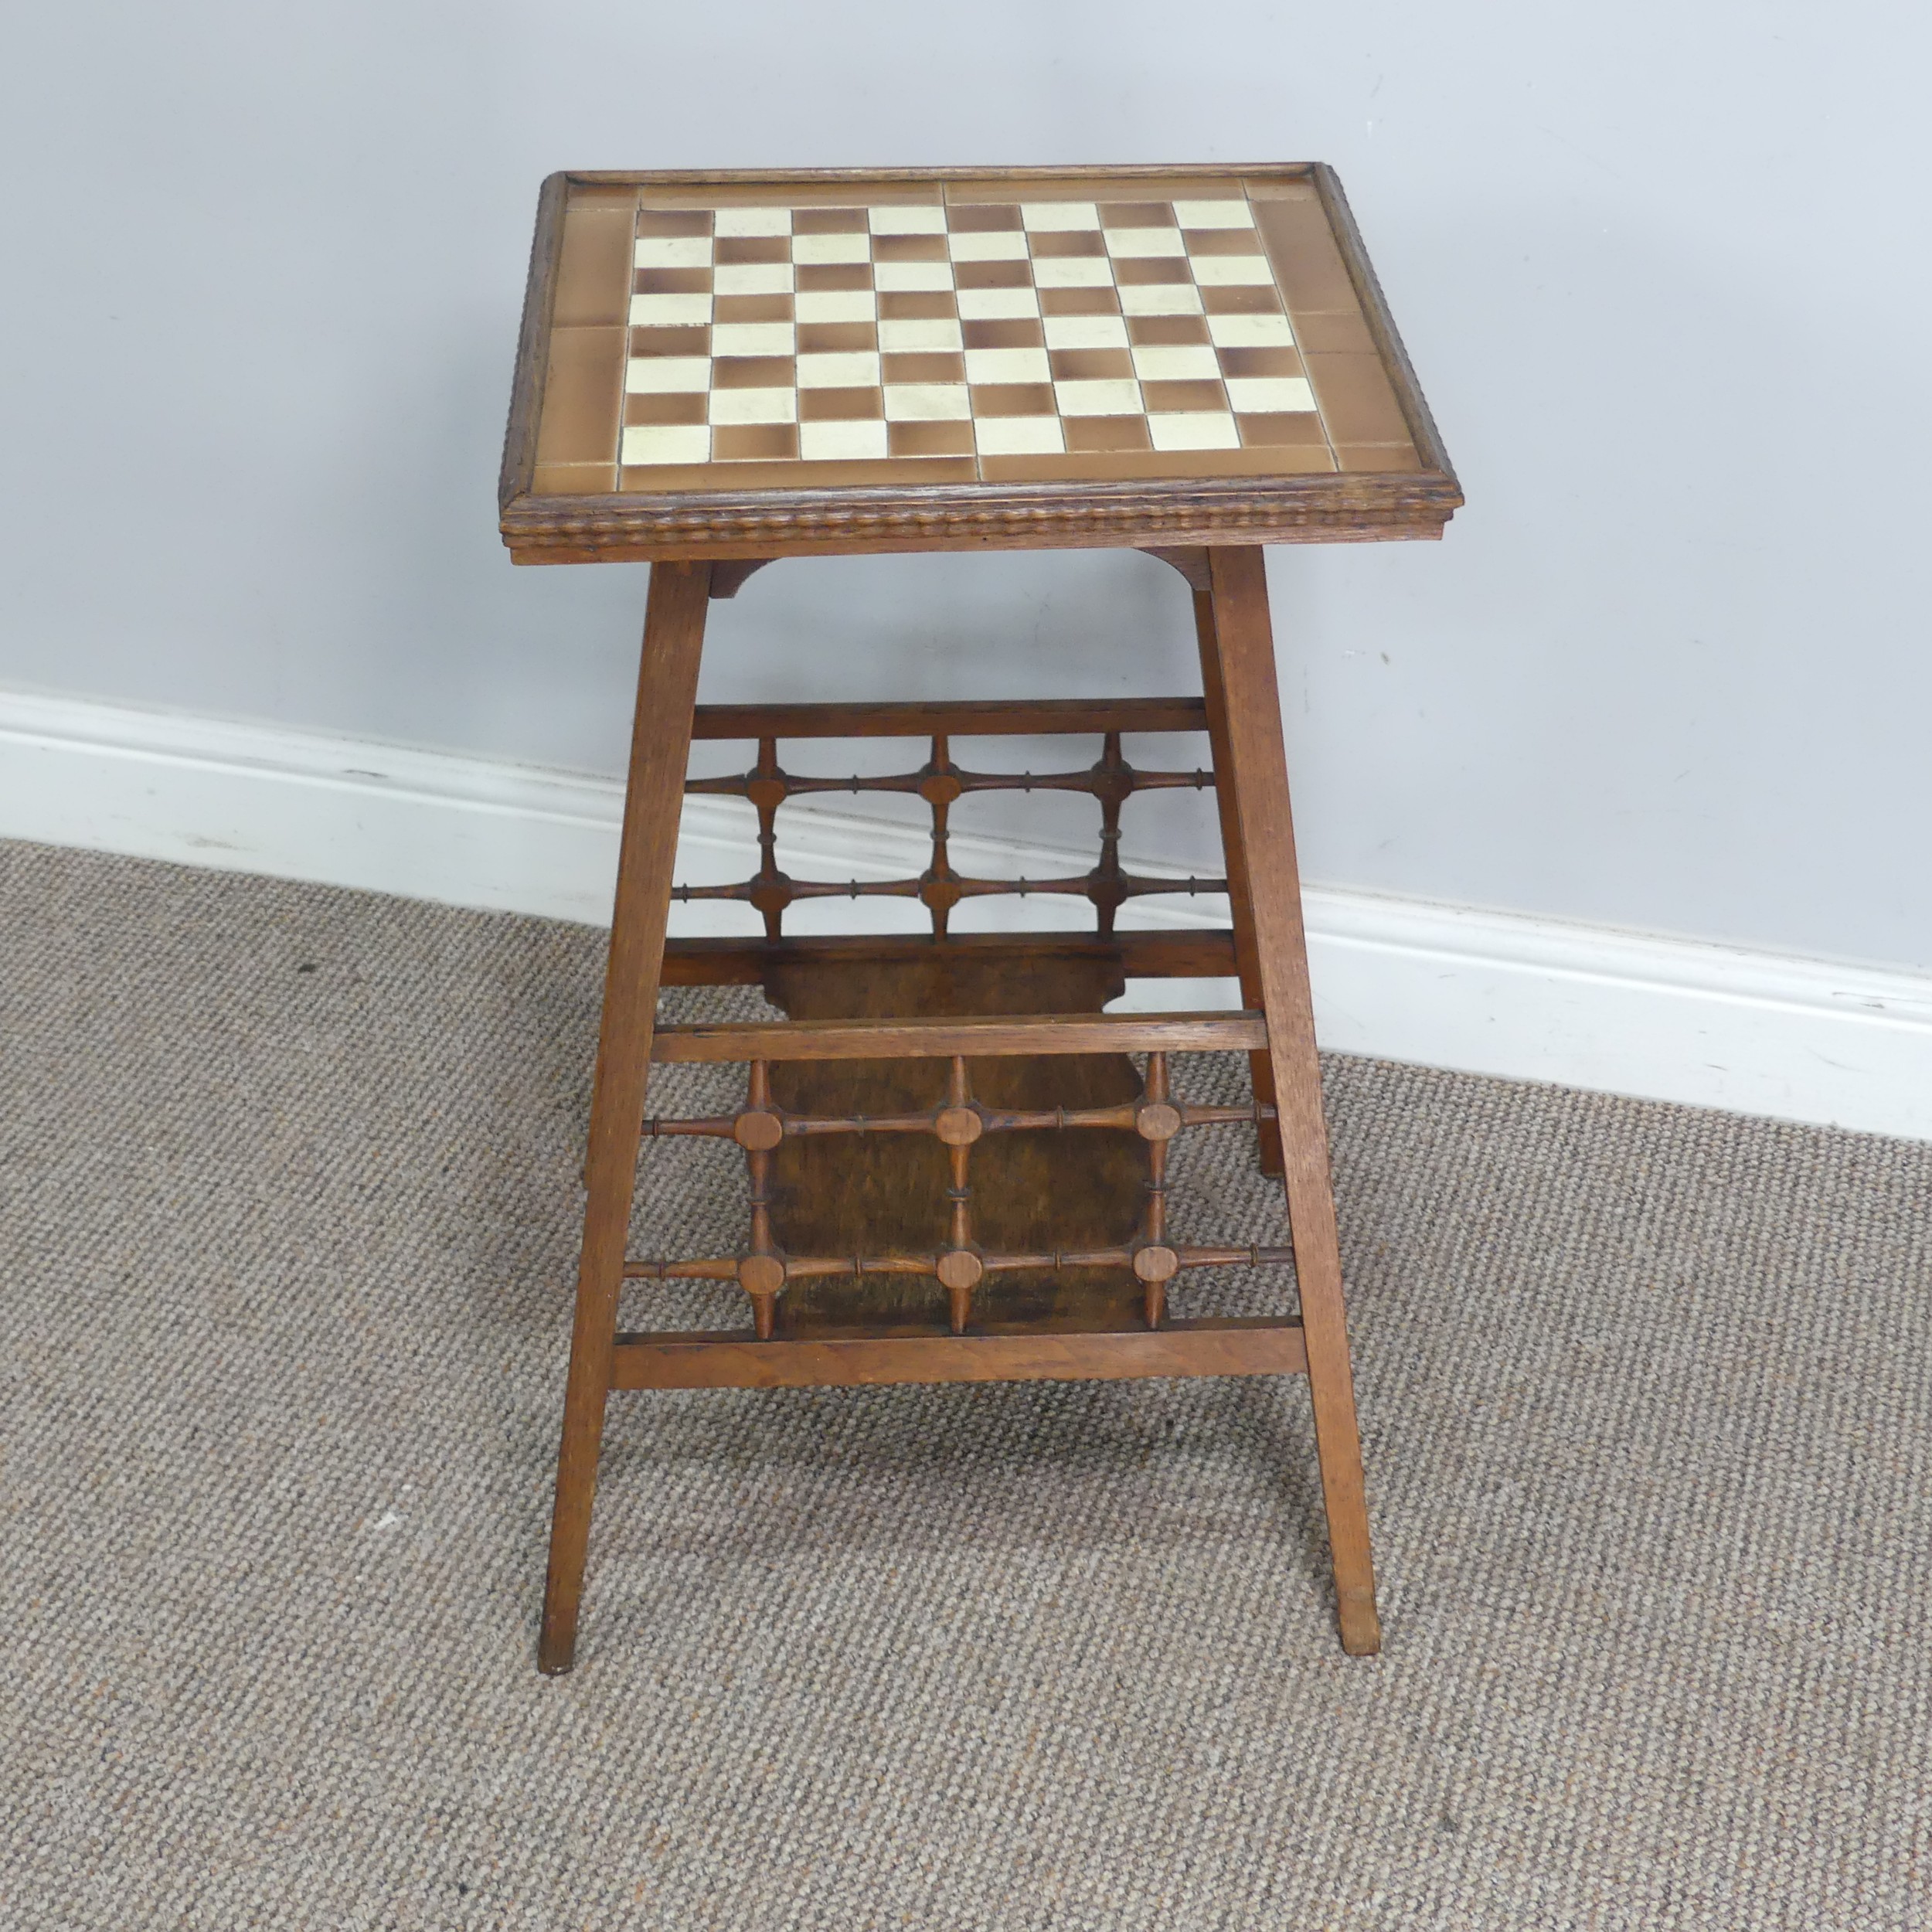 An unusual Arts and Crafts/Aesthetic Movement oak tile top Table, probably by Shapland and Petter o - Image 4 of 6